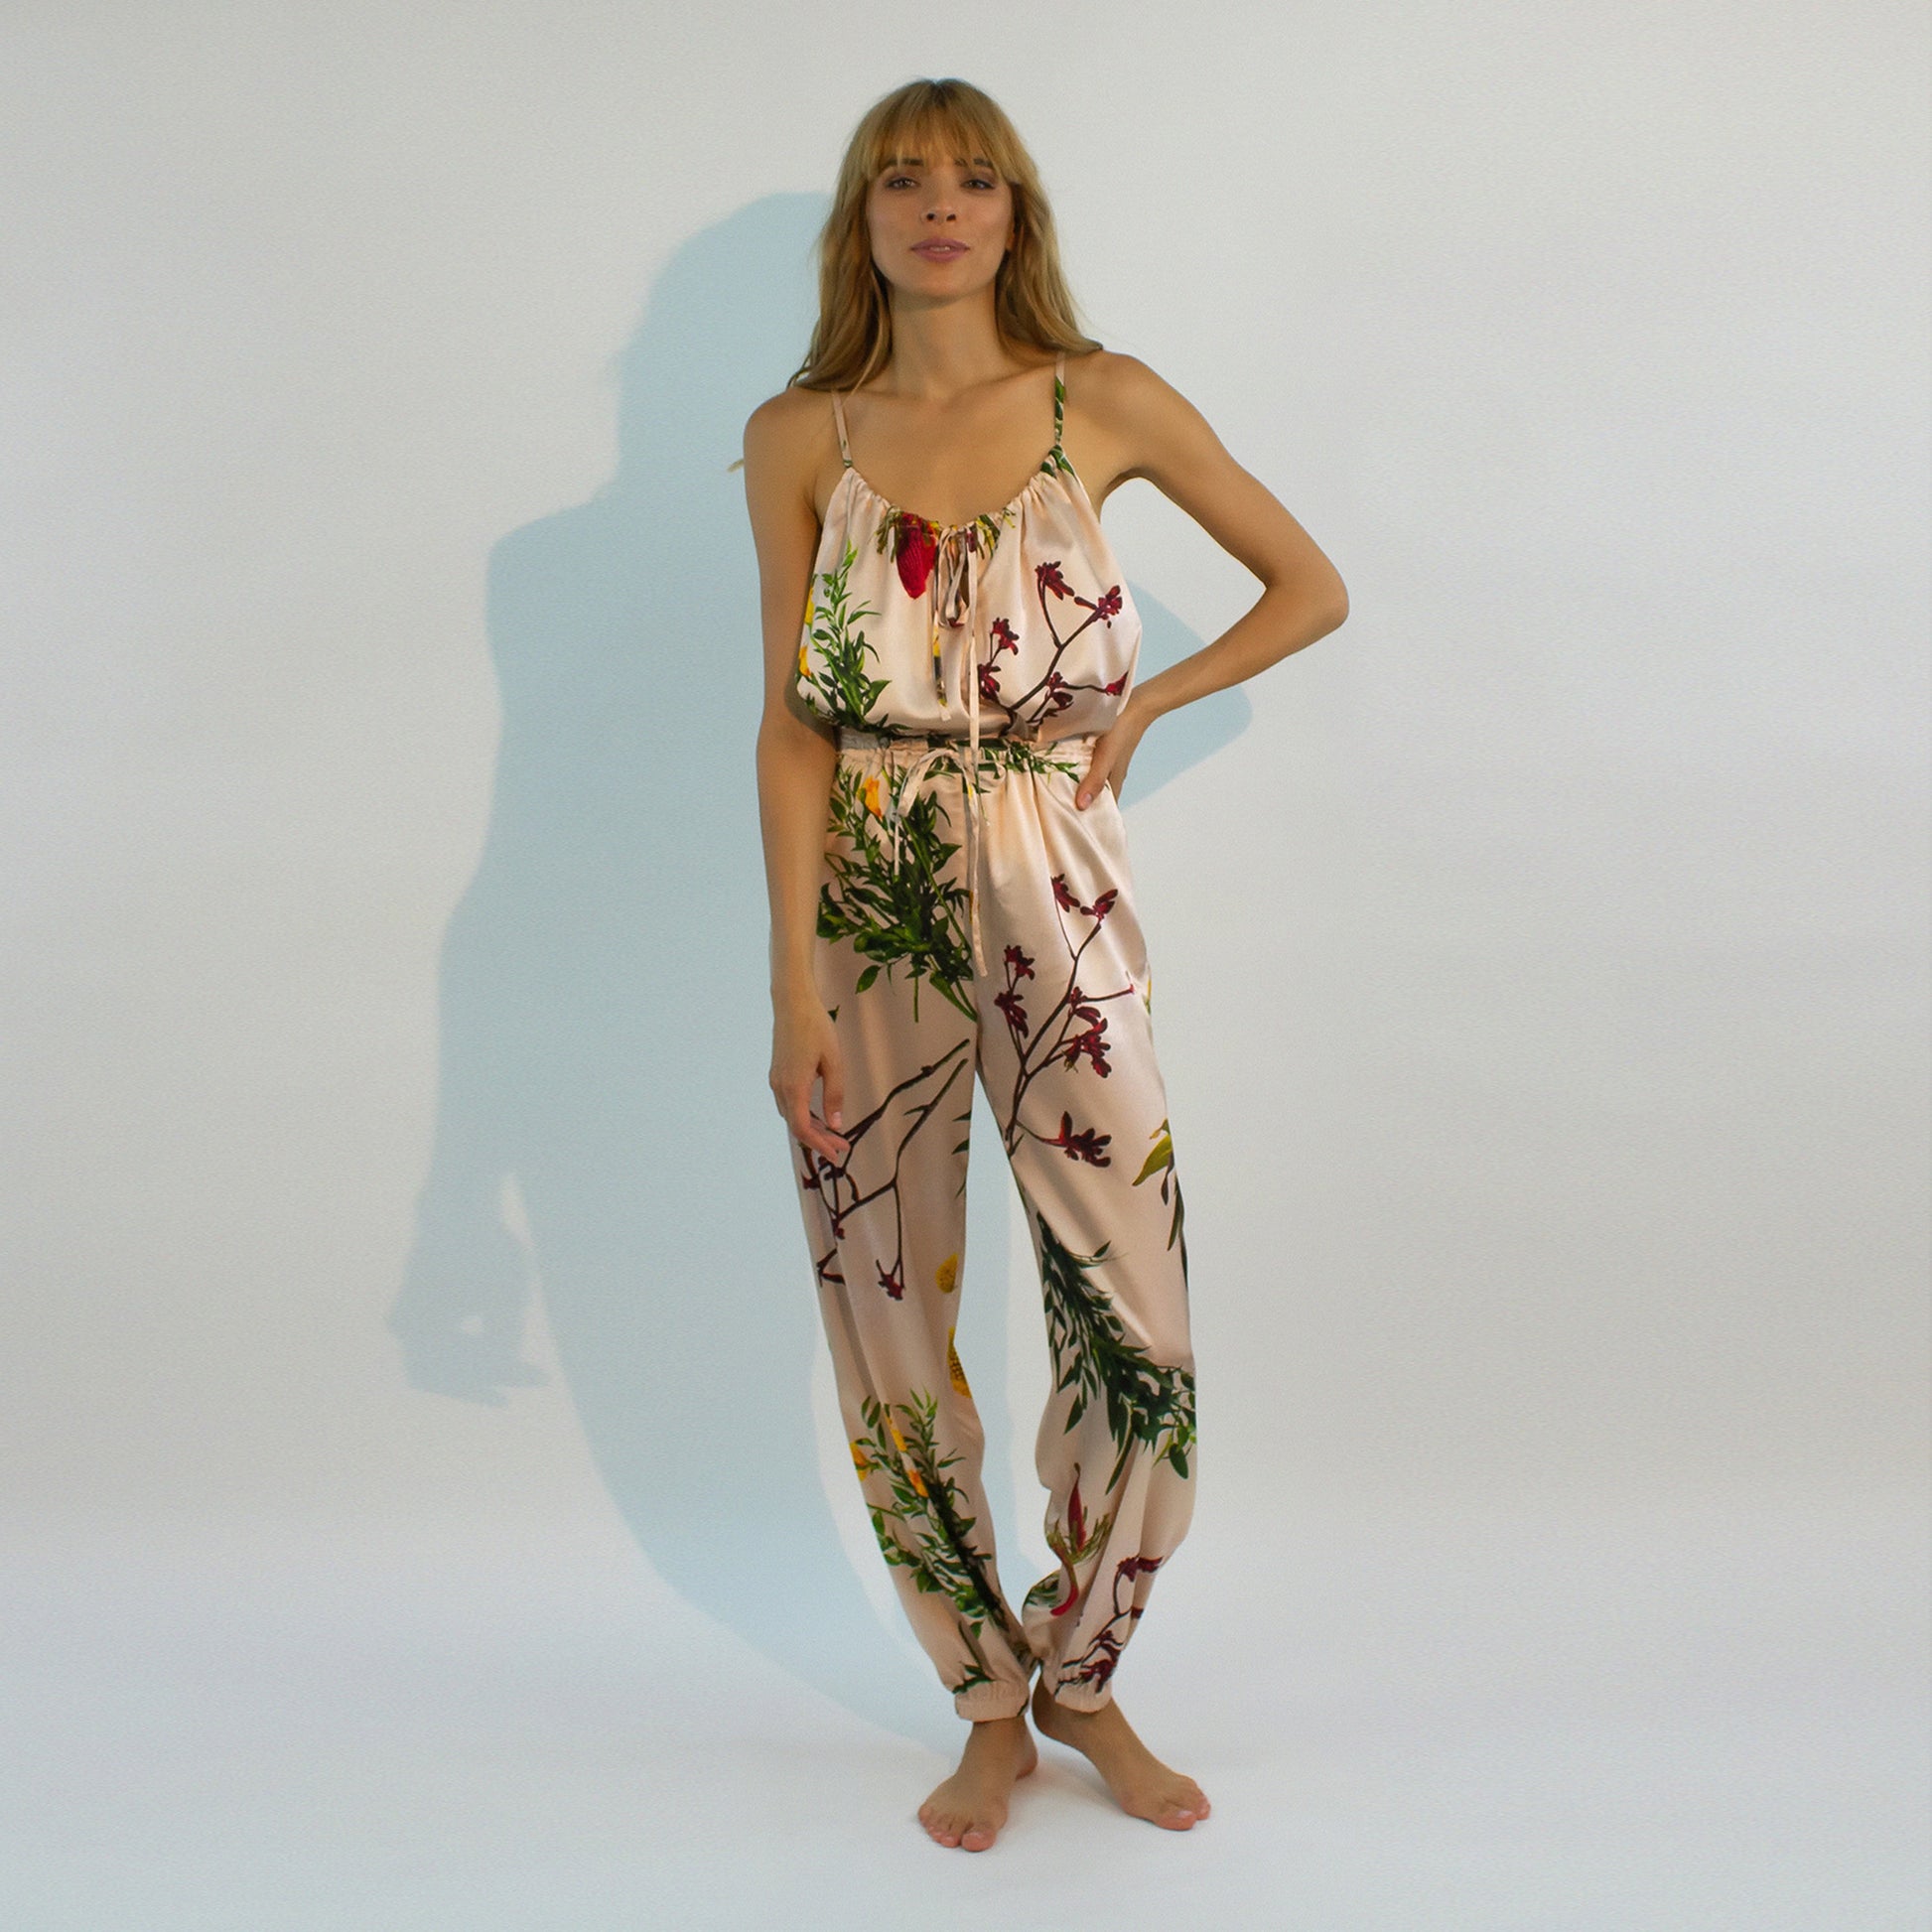 Camisole FLYING FLOWER is made from Mulberry silk and has thin, adjustable straps.